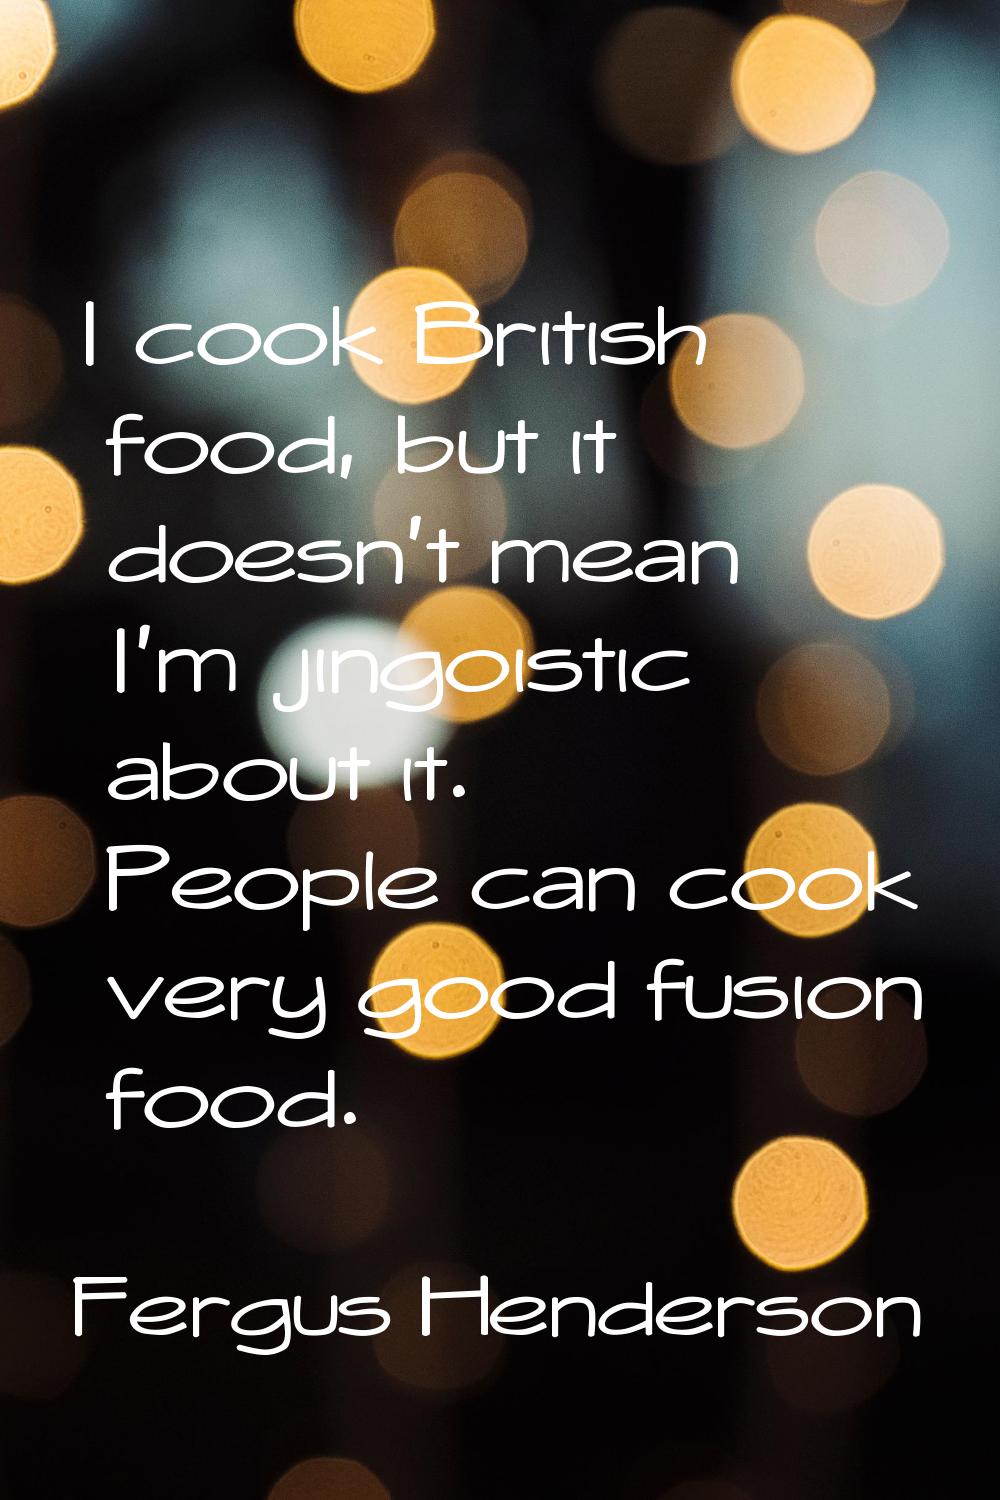 I cook British food, but it doesn't mean I'm jingoistic about it. People can cook very good fusion 